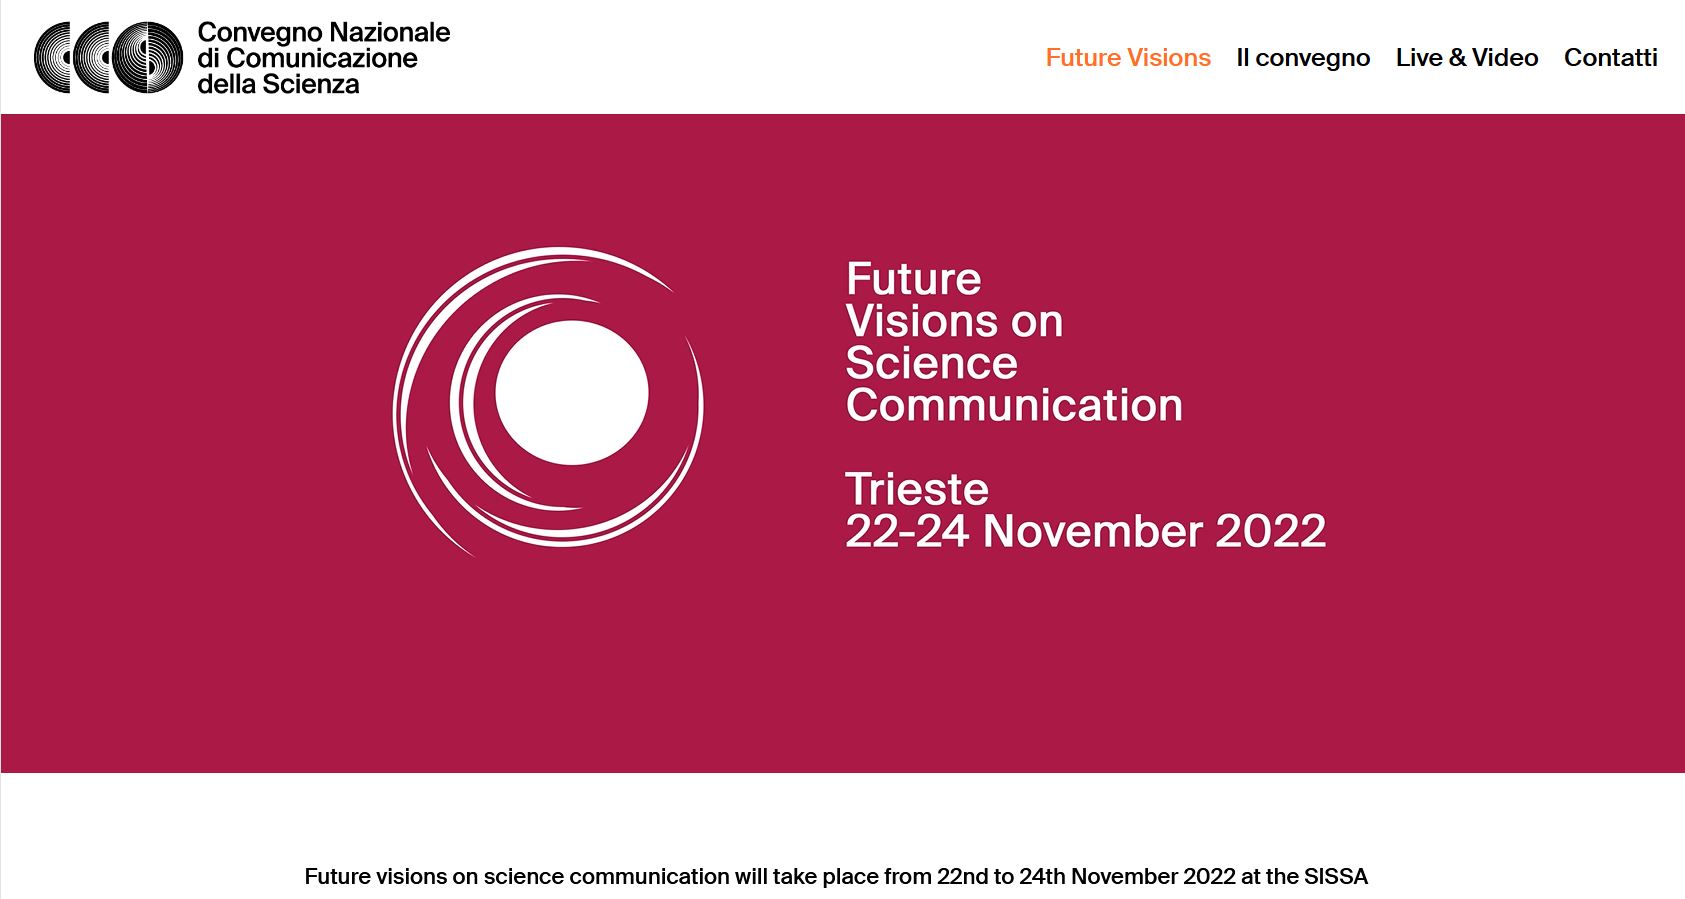 Future visions on science communication